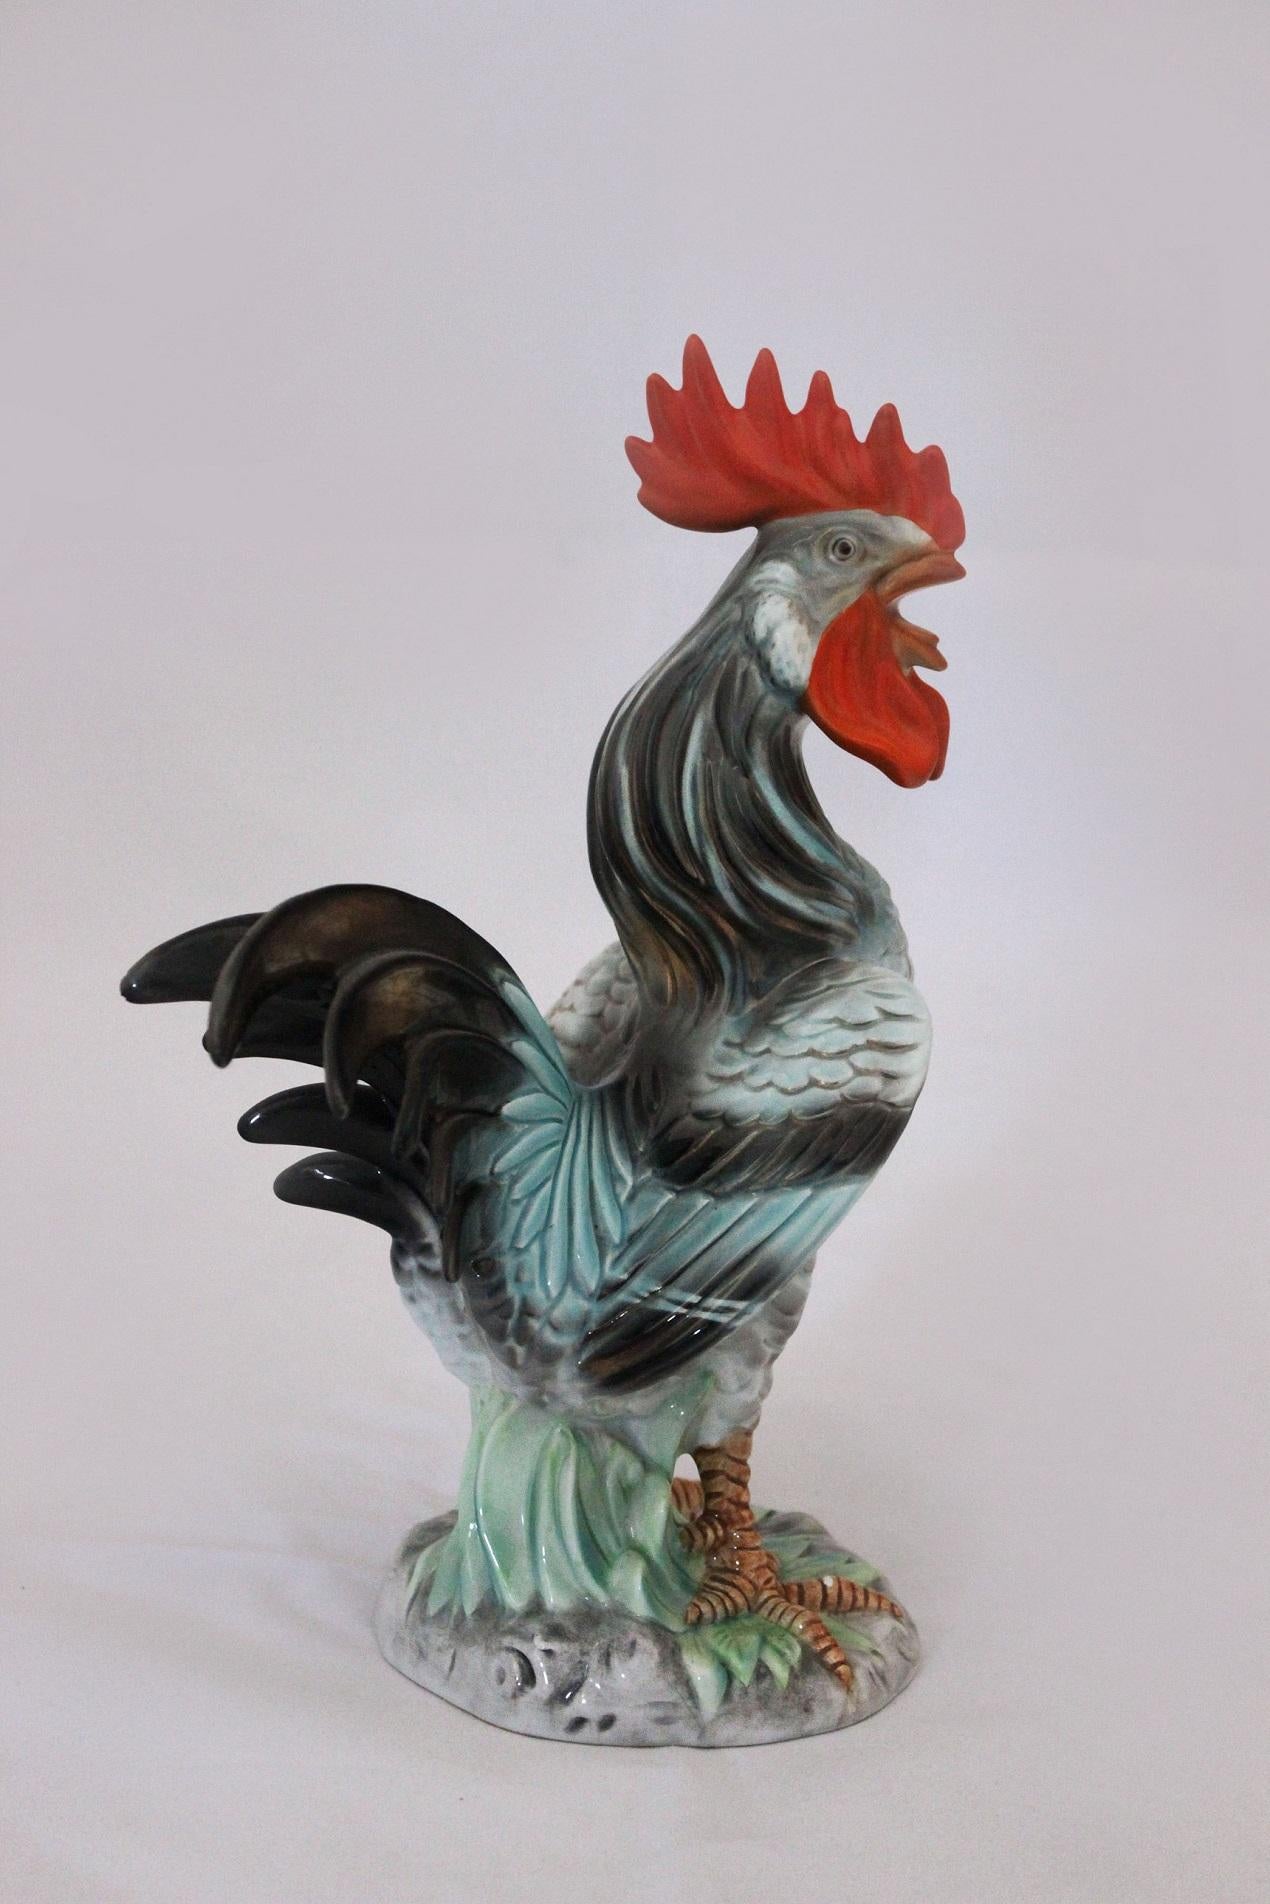 Italian Ceramic Rooster Sculpture by Ronza, 1940 For Sale